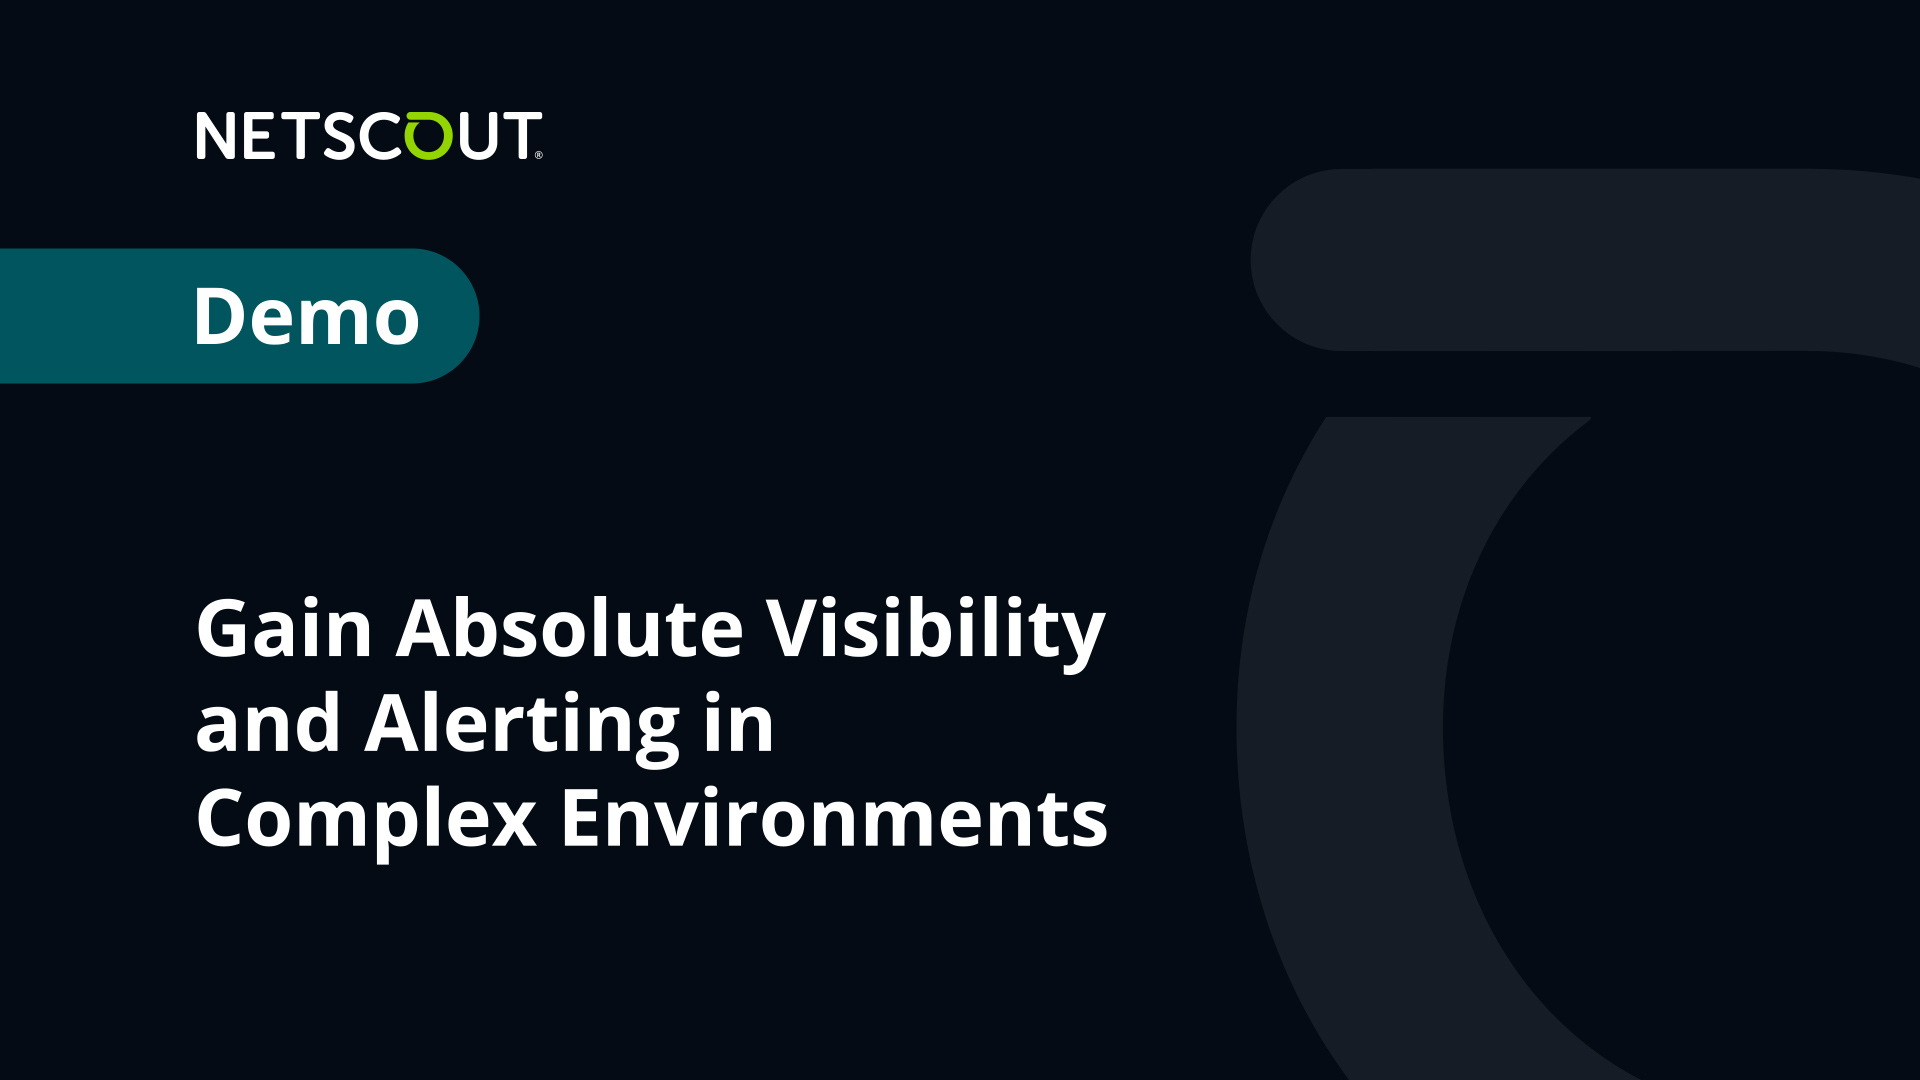 Gain Absolute Visibility and Alerting in Complex Environments